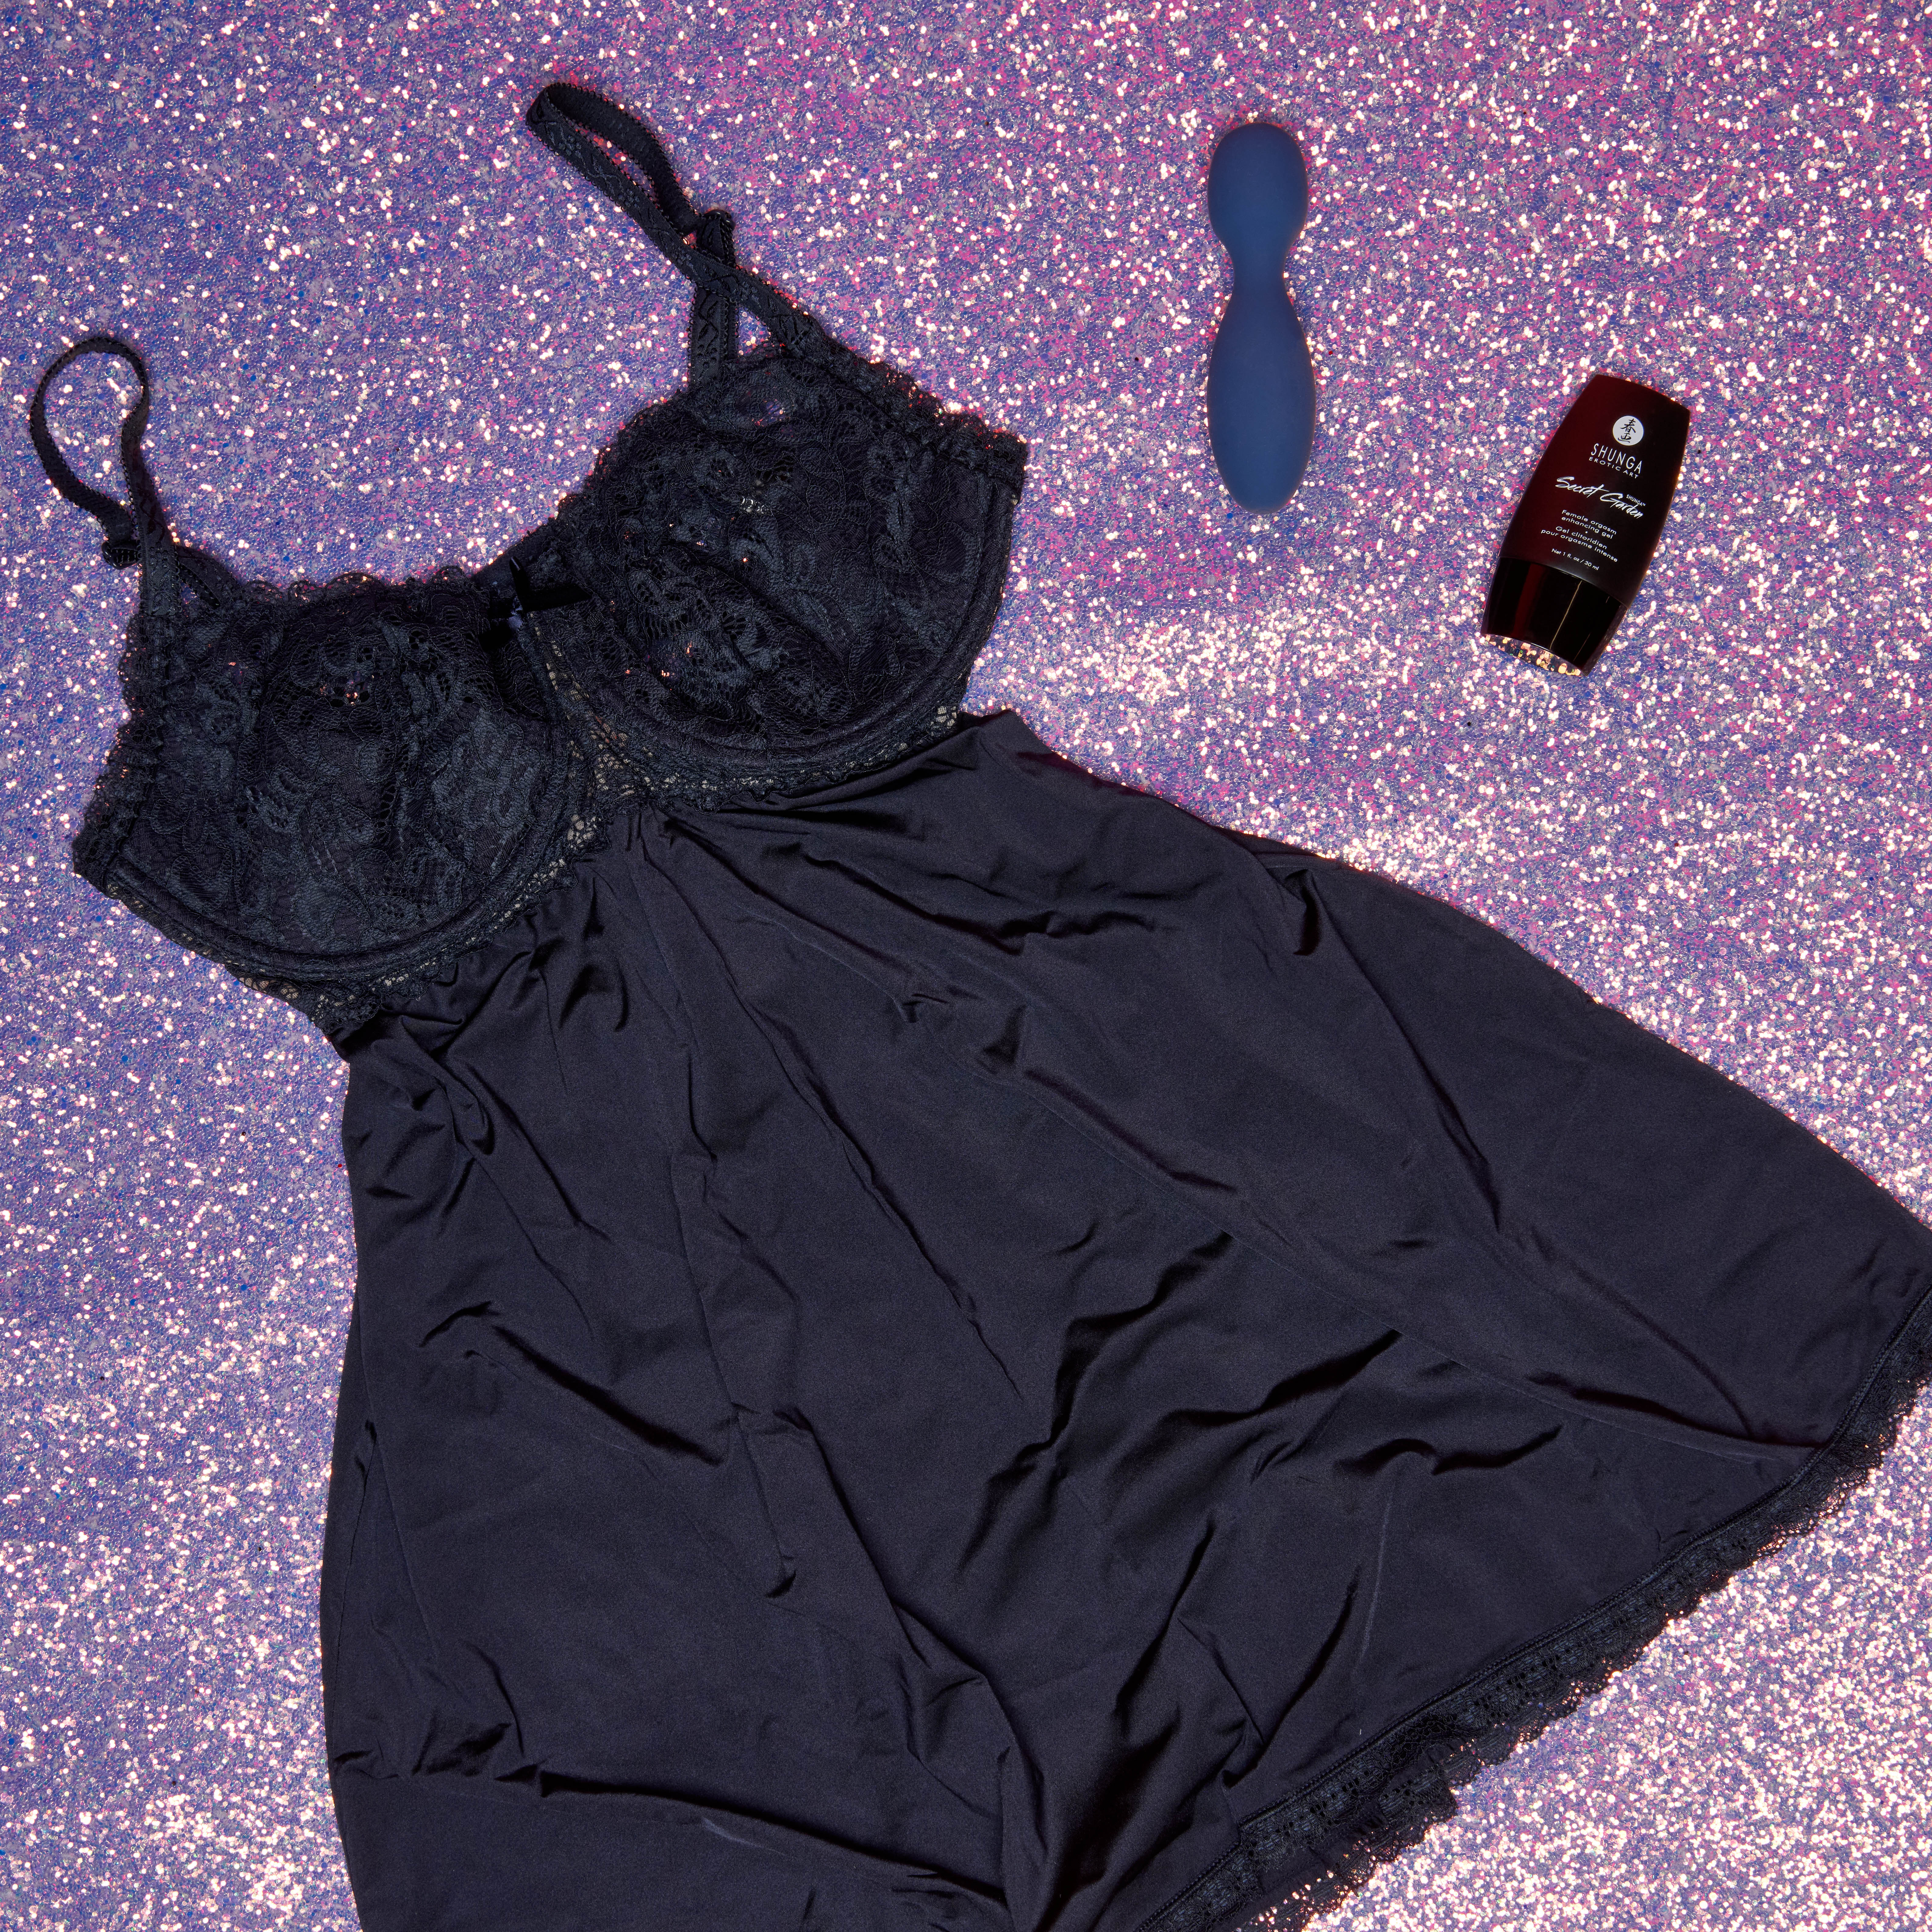 blue chemise with a wand vibrator and a gel. 